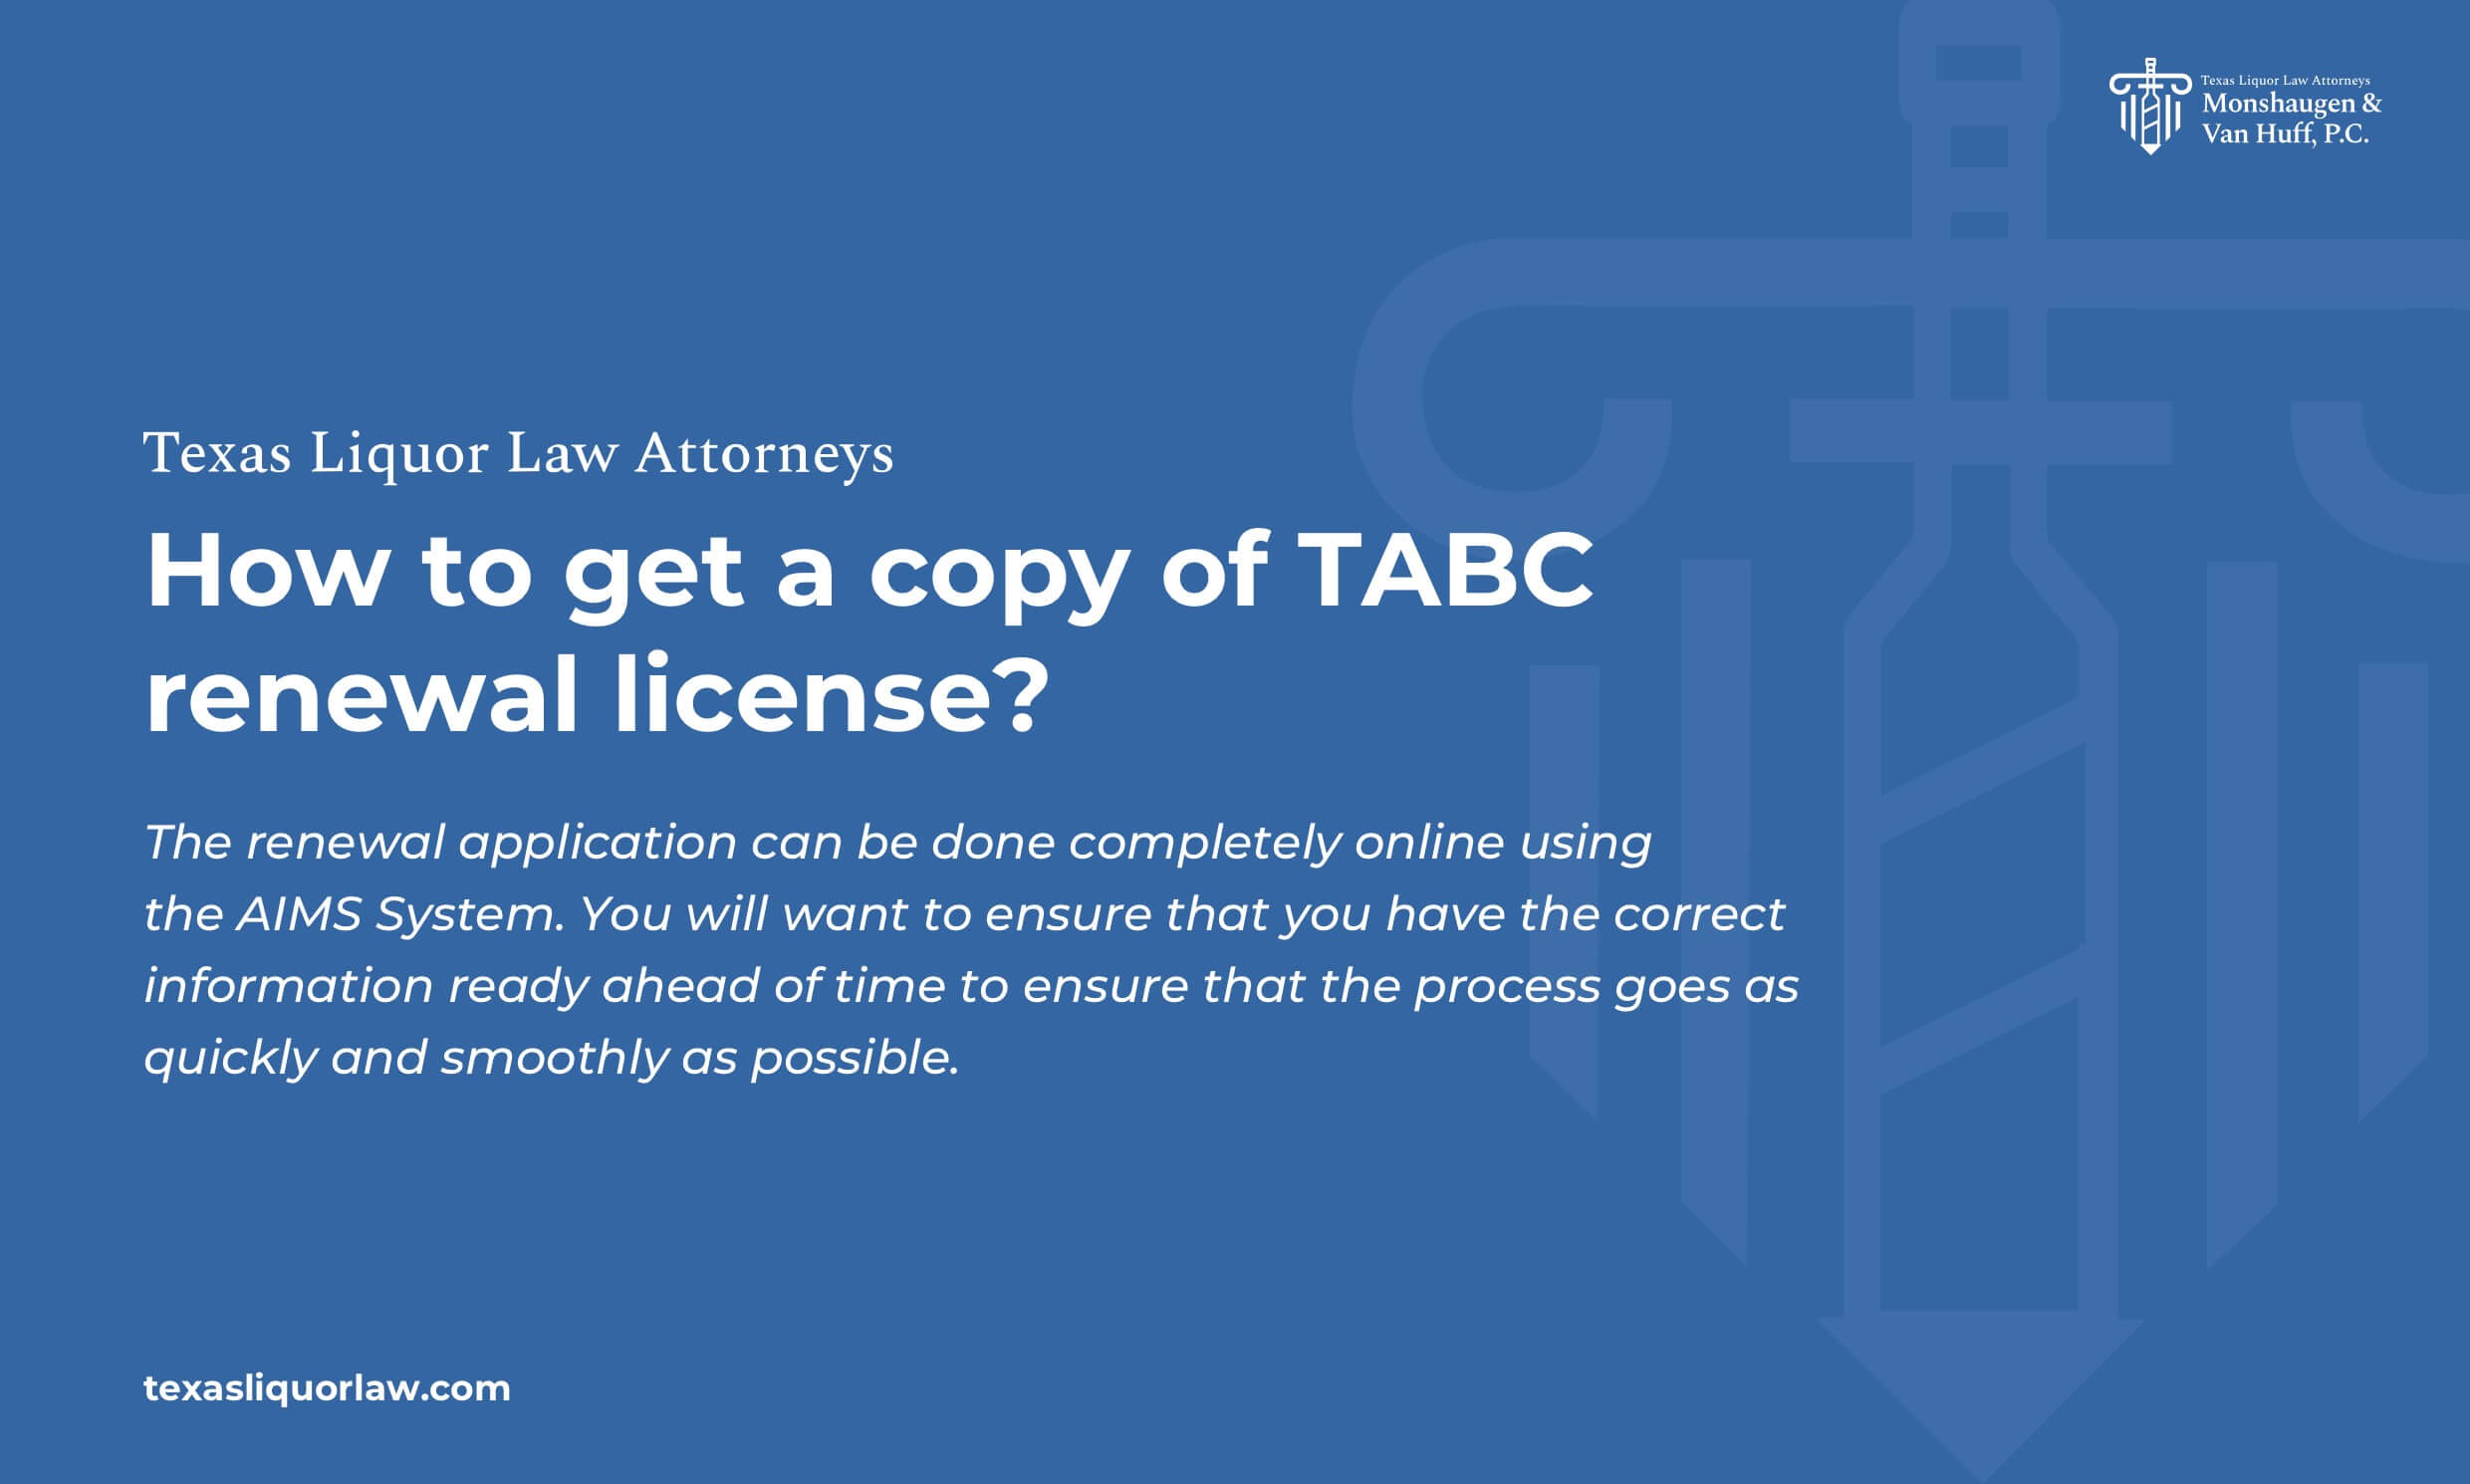 How to get a copy of TABC renewal license?